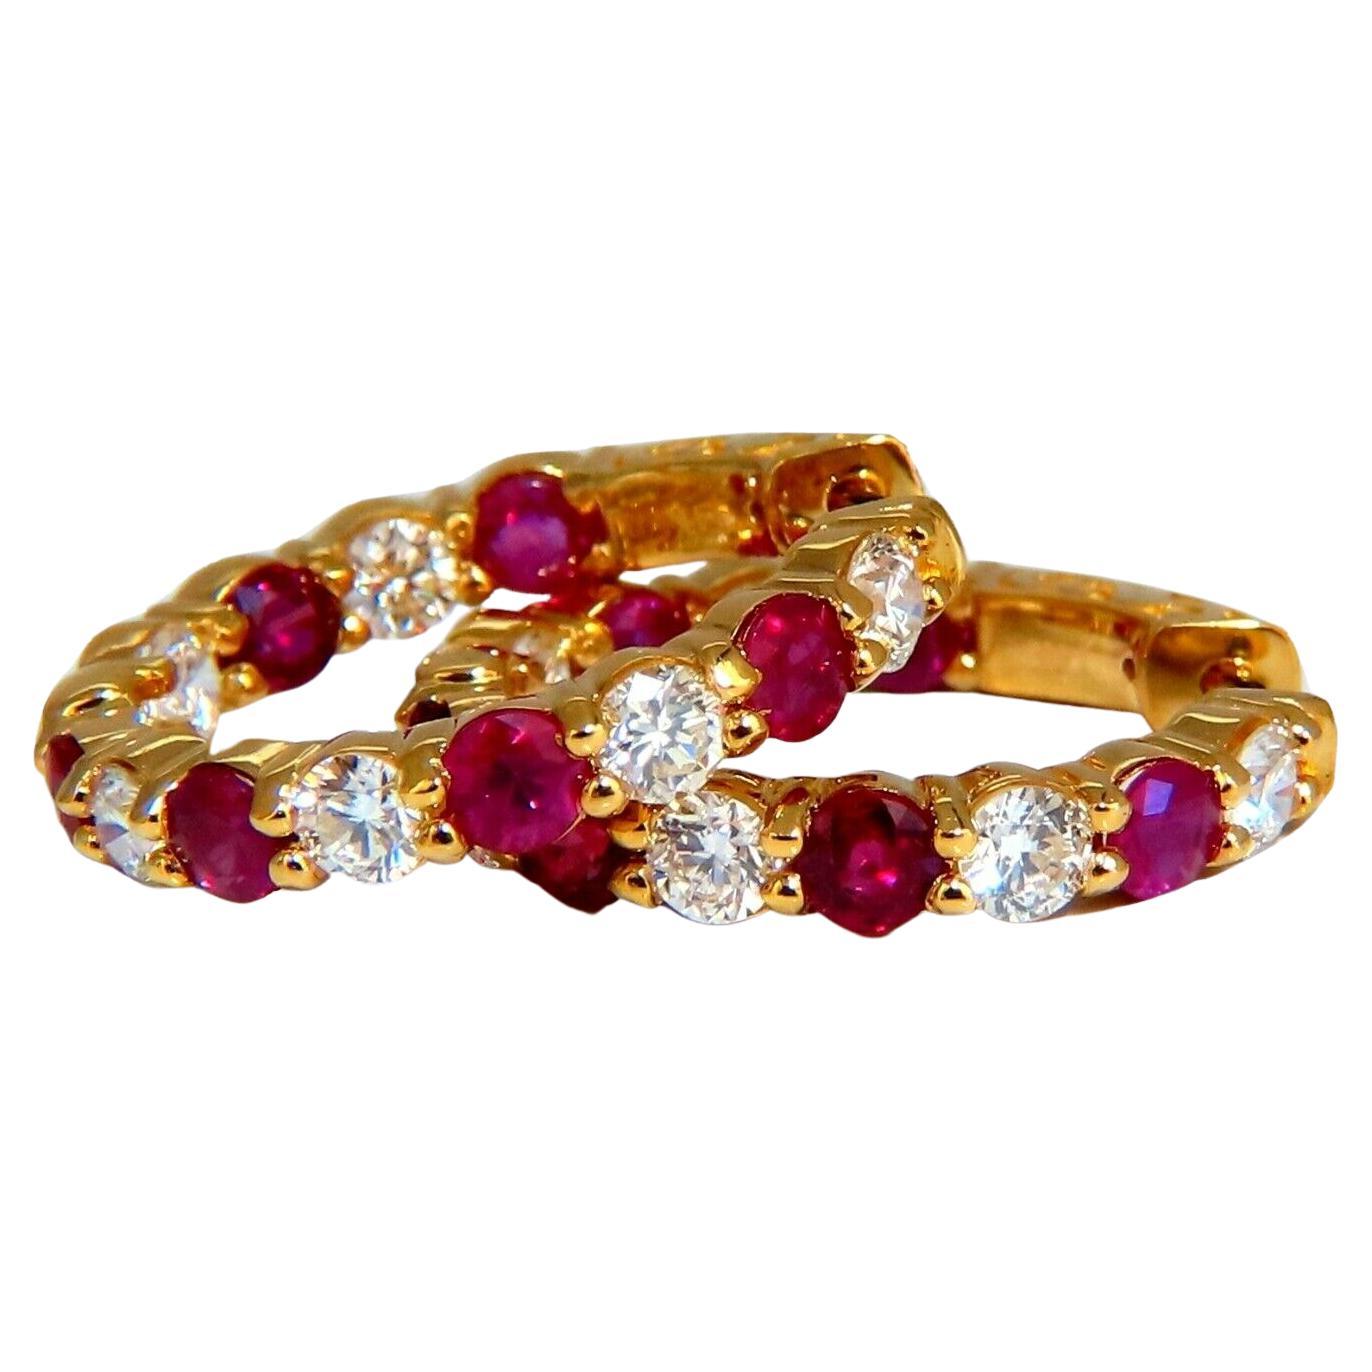 4.14ct Natural Ruby Diamonds Hoop Earrings 14kt Yellow Gold Inside Out